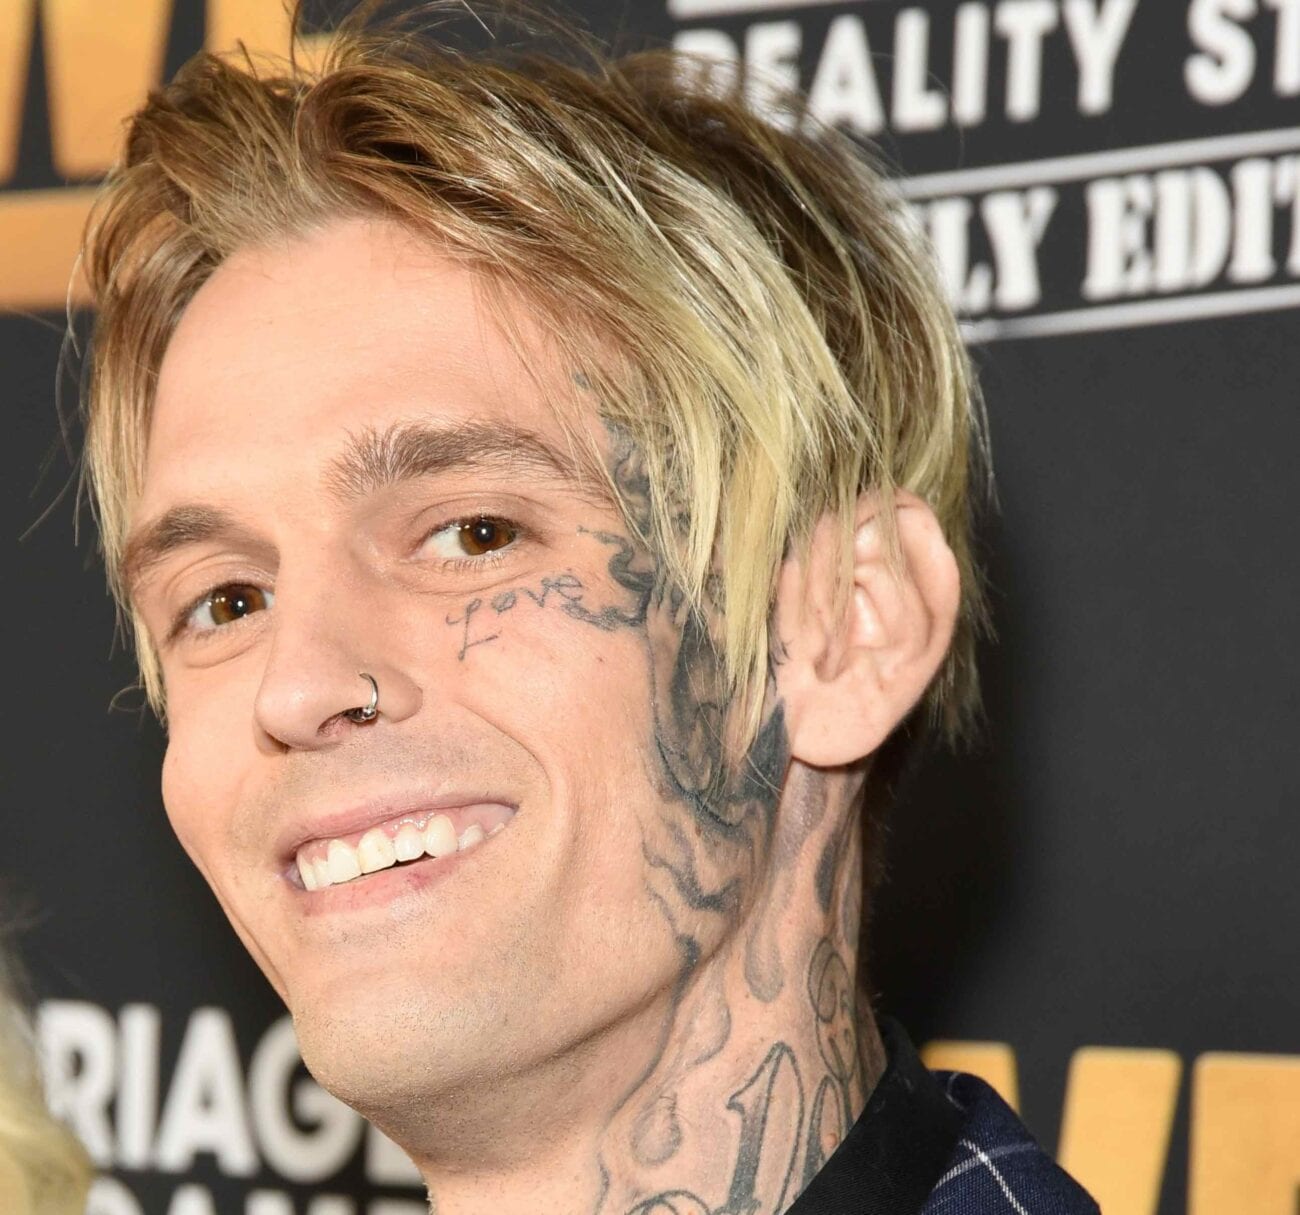 Did Aaron Carter find a new calling, or has his net worth dropped that much? Find out here why Aaron Carter's doing porn.